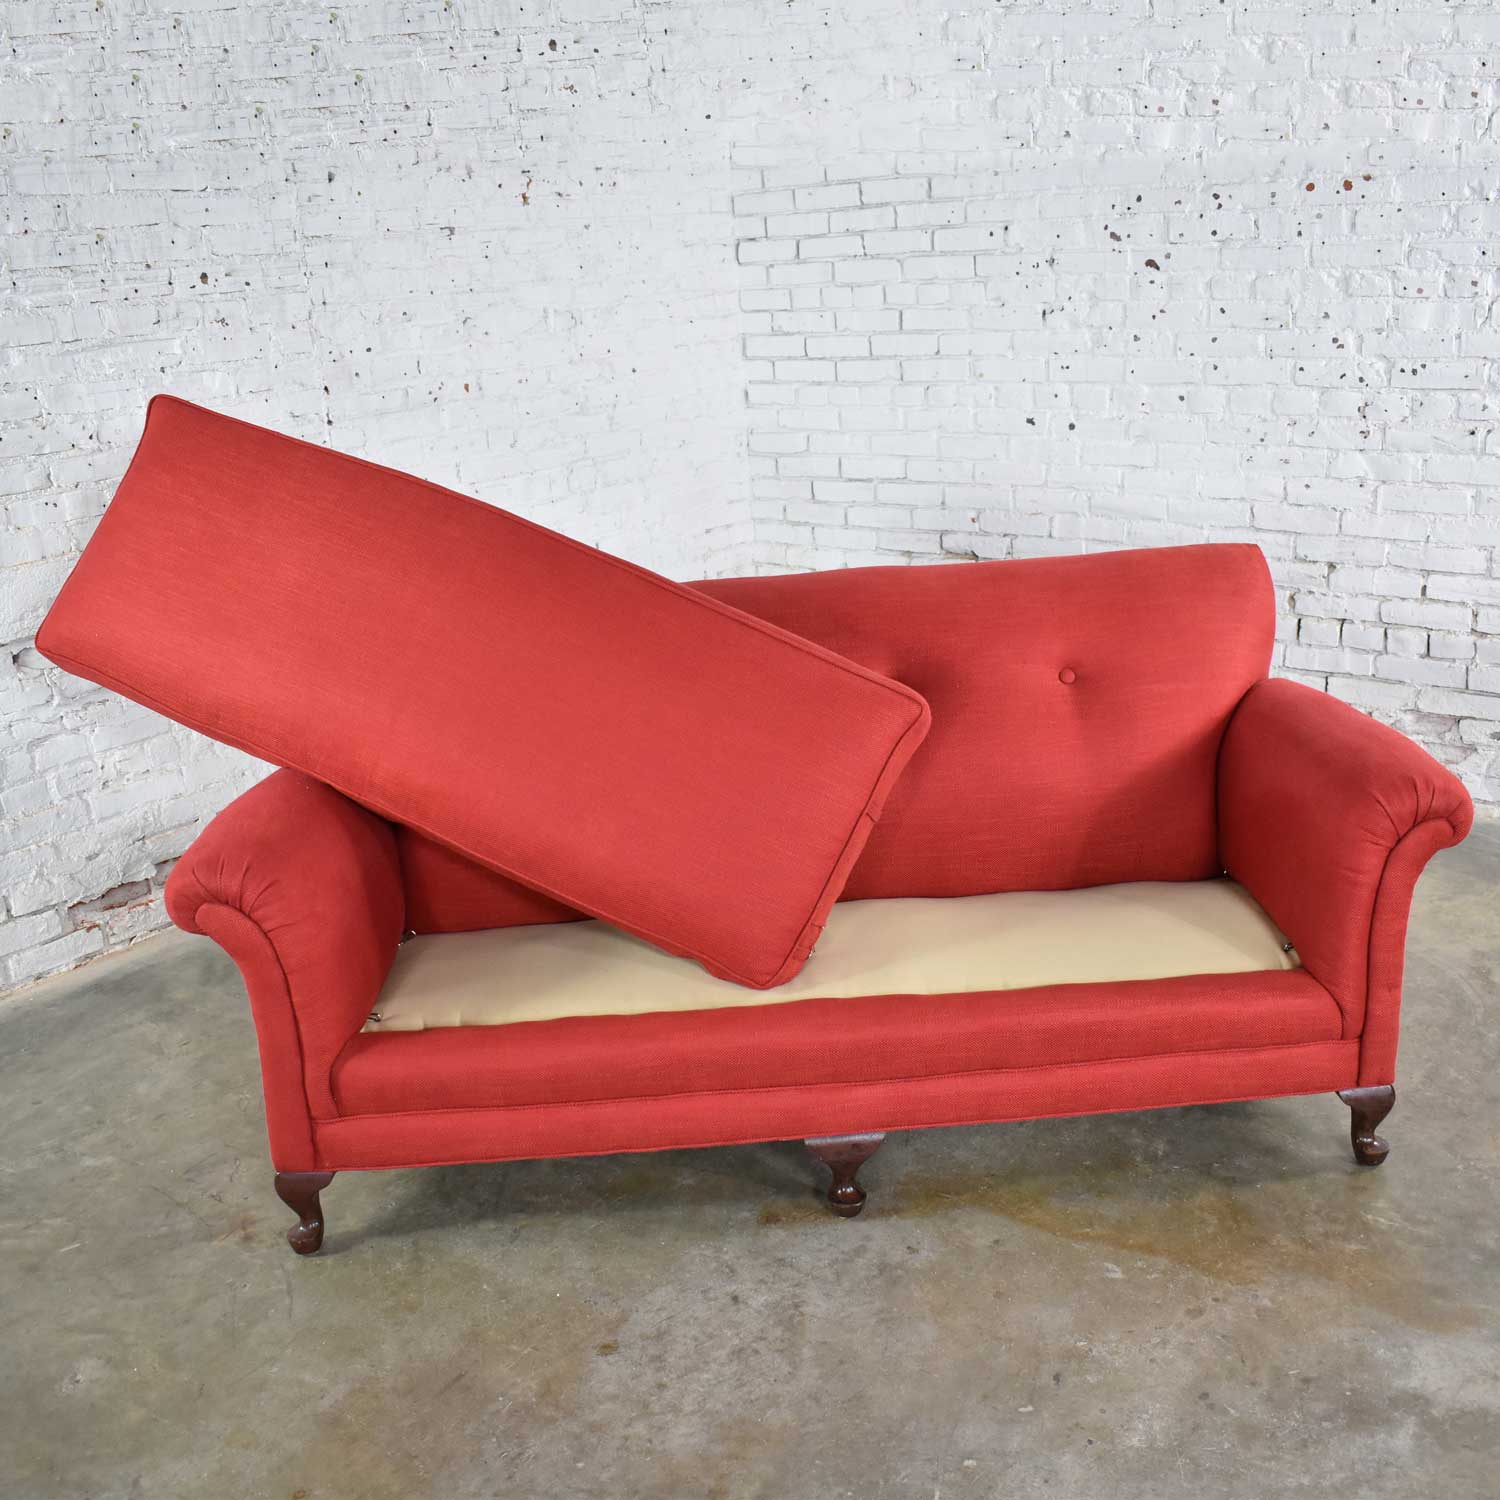 Red Smaller Size Lawson Sofa with Rolled Arms Down Bench Seat and Tight Back